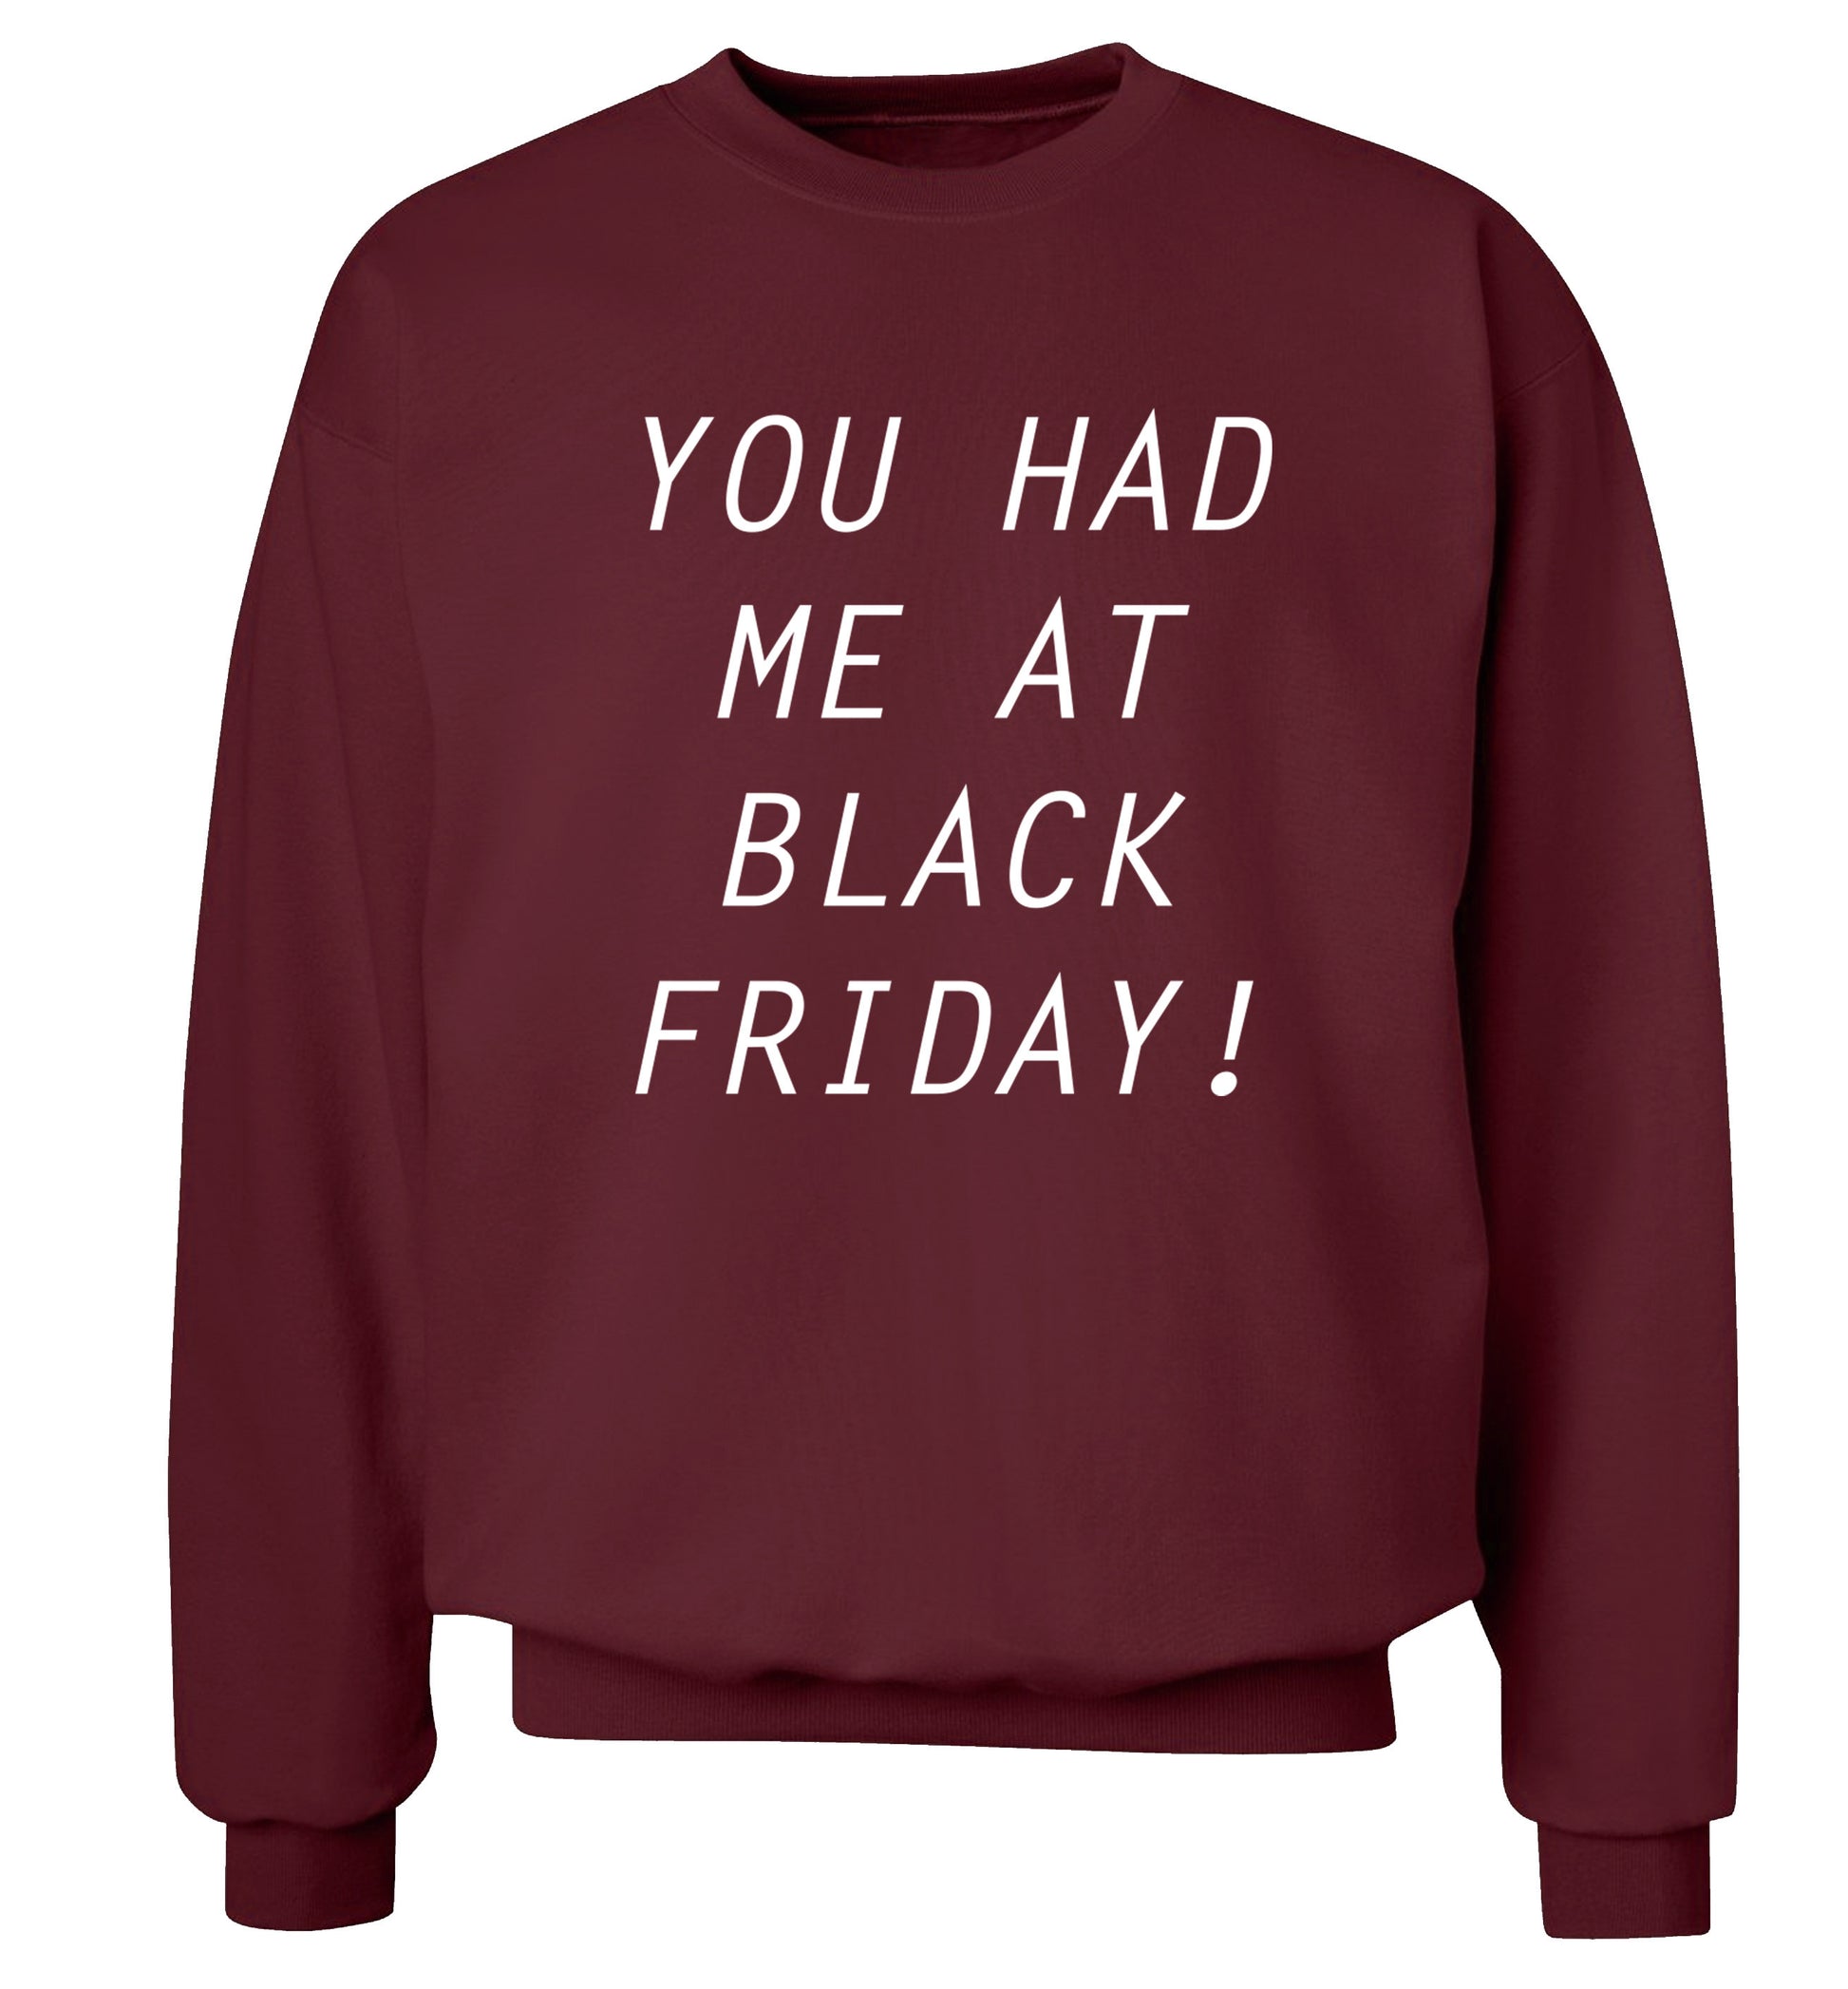 You had me at black friday Adult's unisex maroon Sweater 2XL